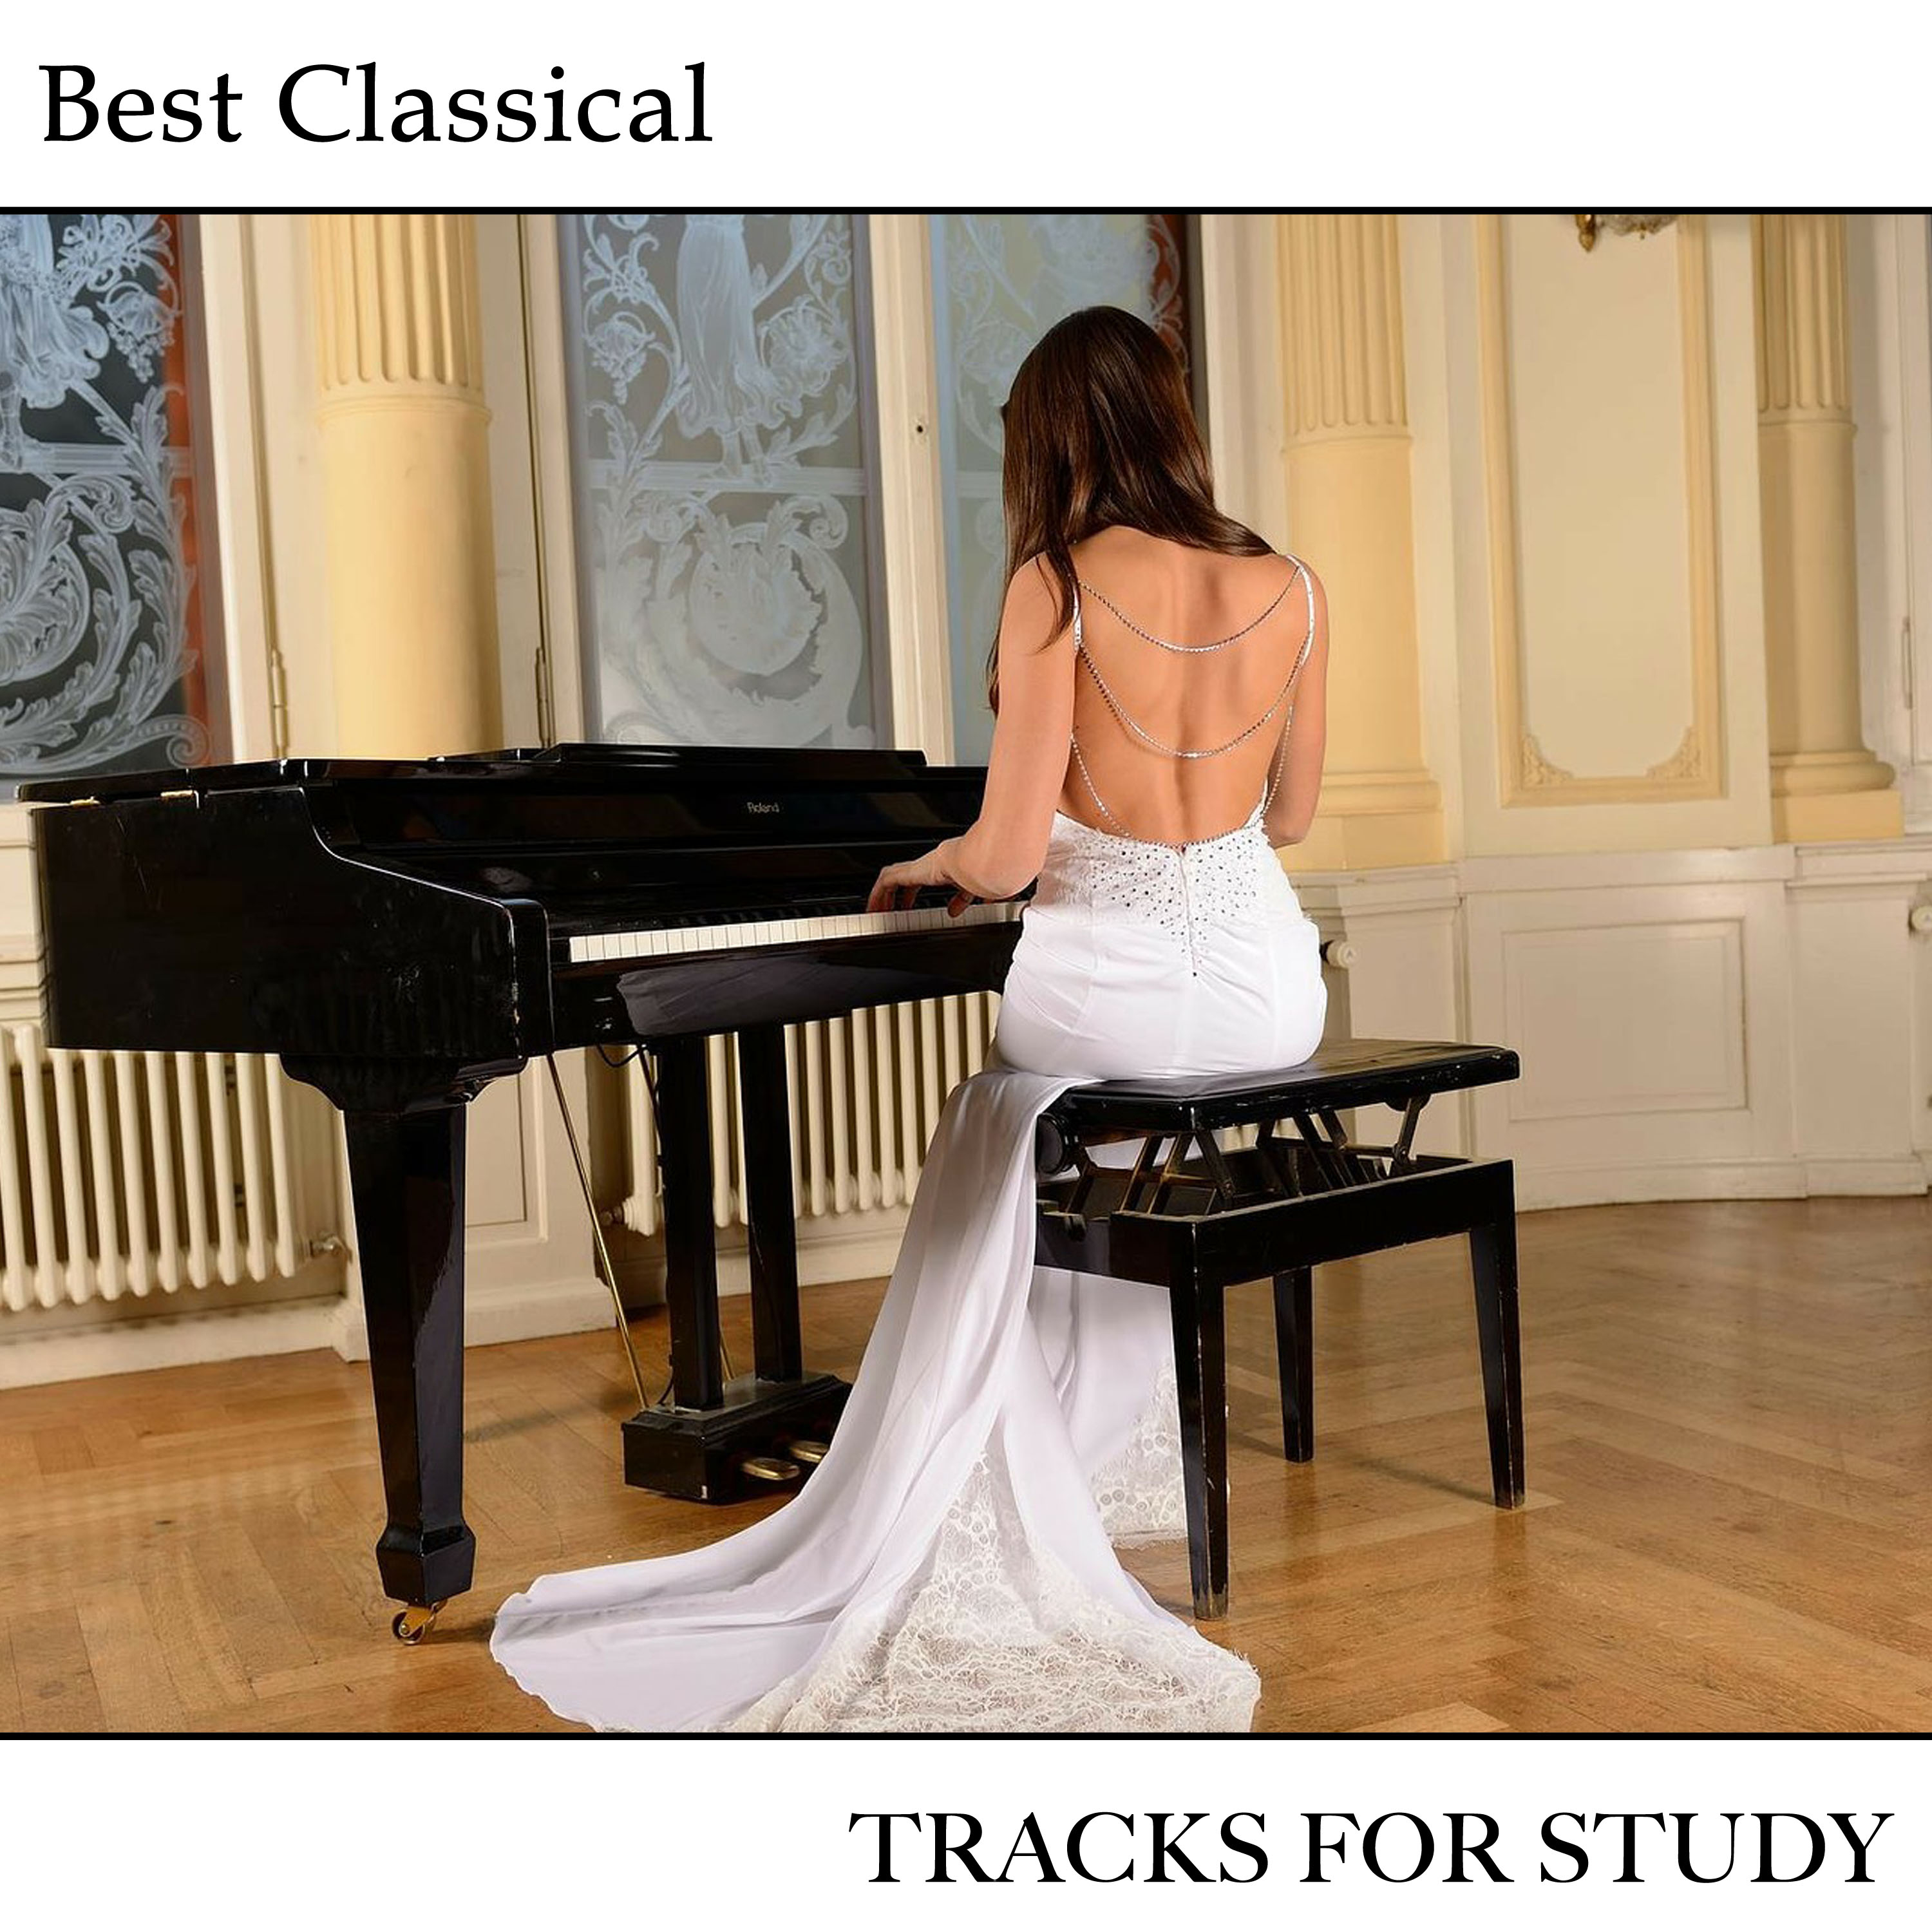 15 of the Best Classical Tracks for Study